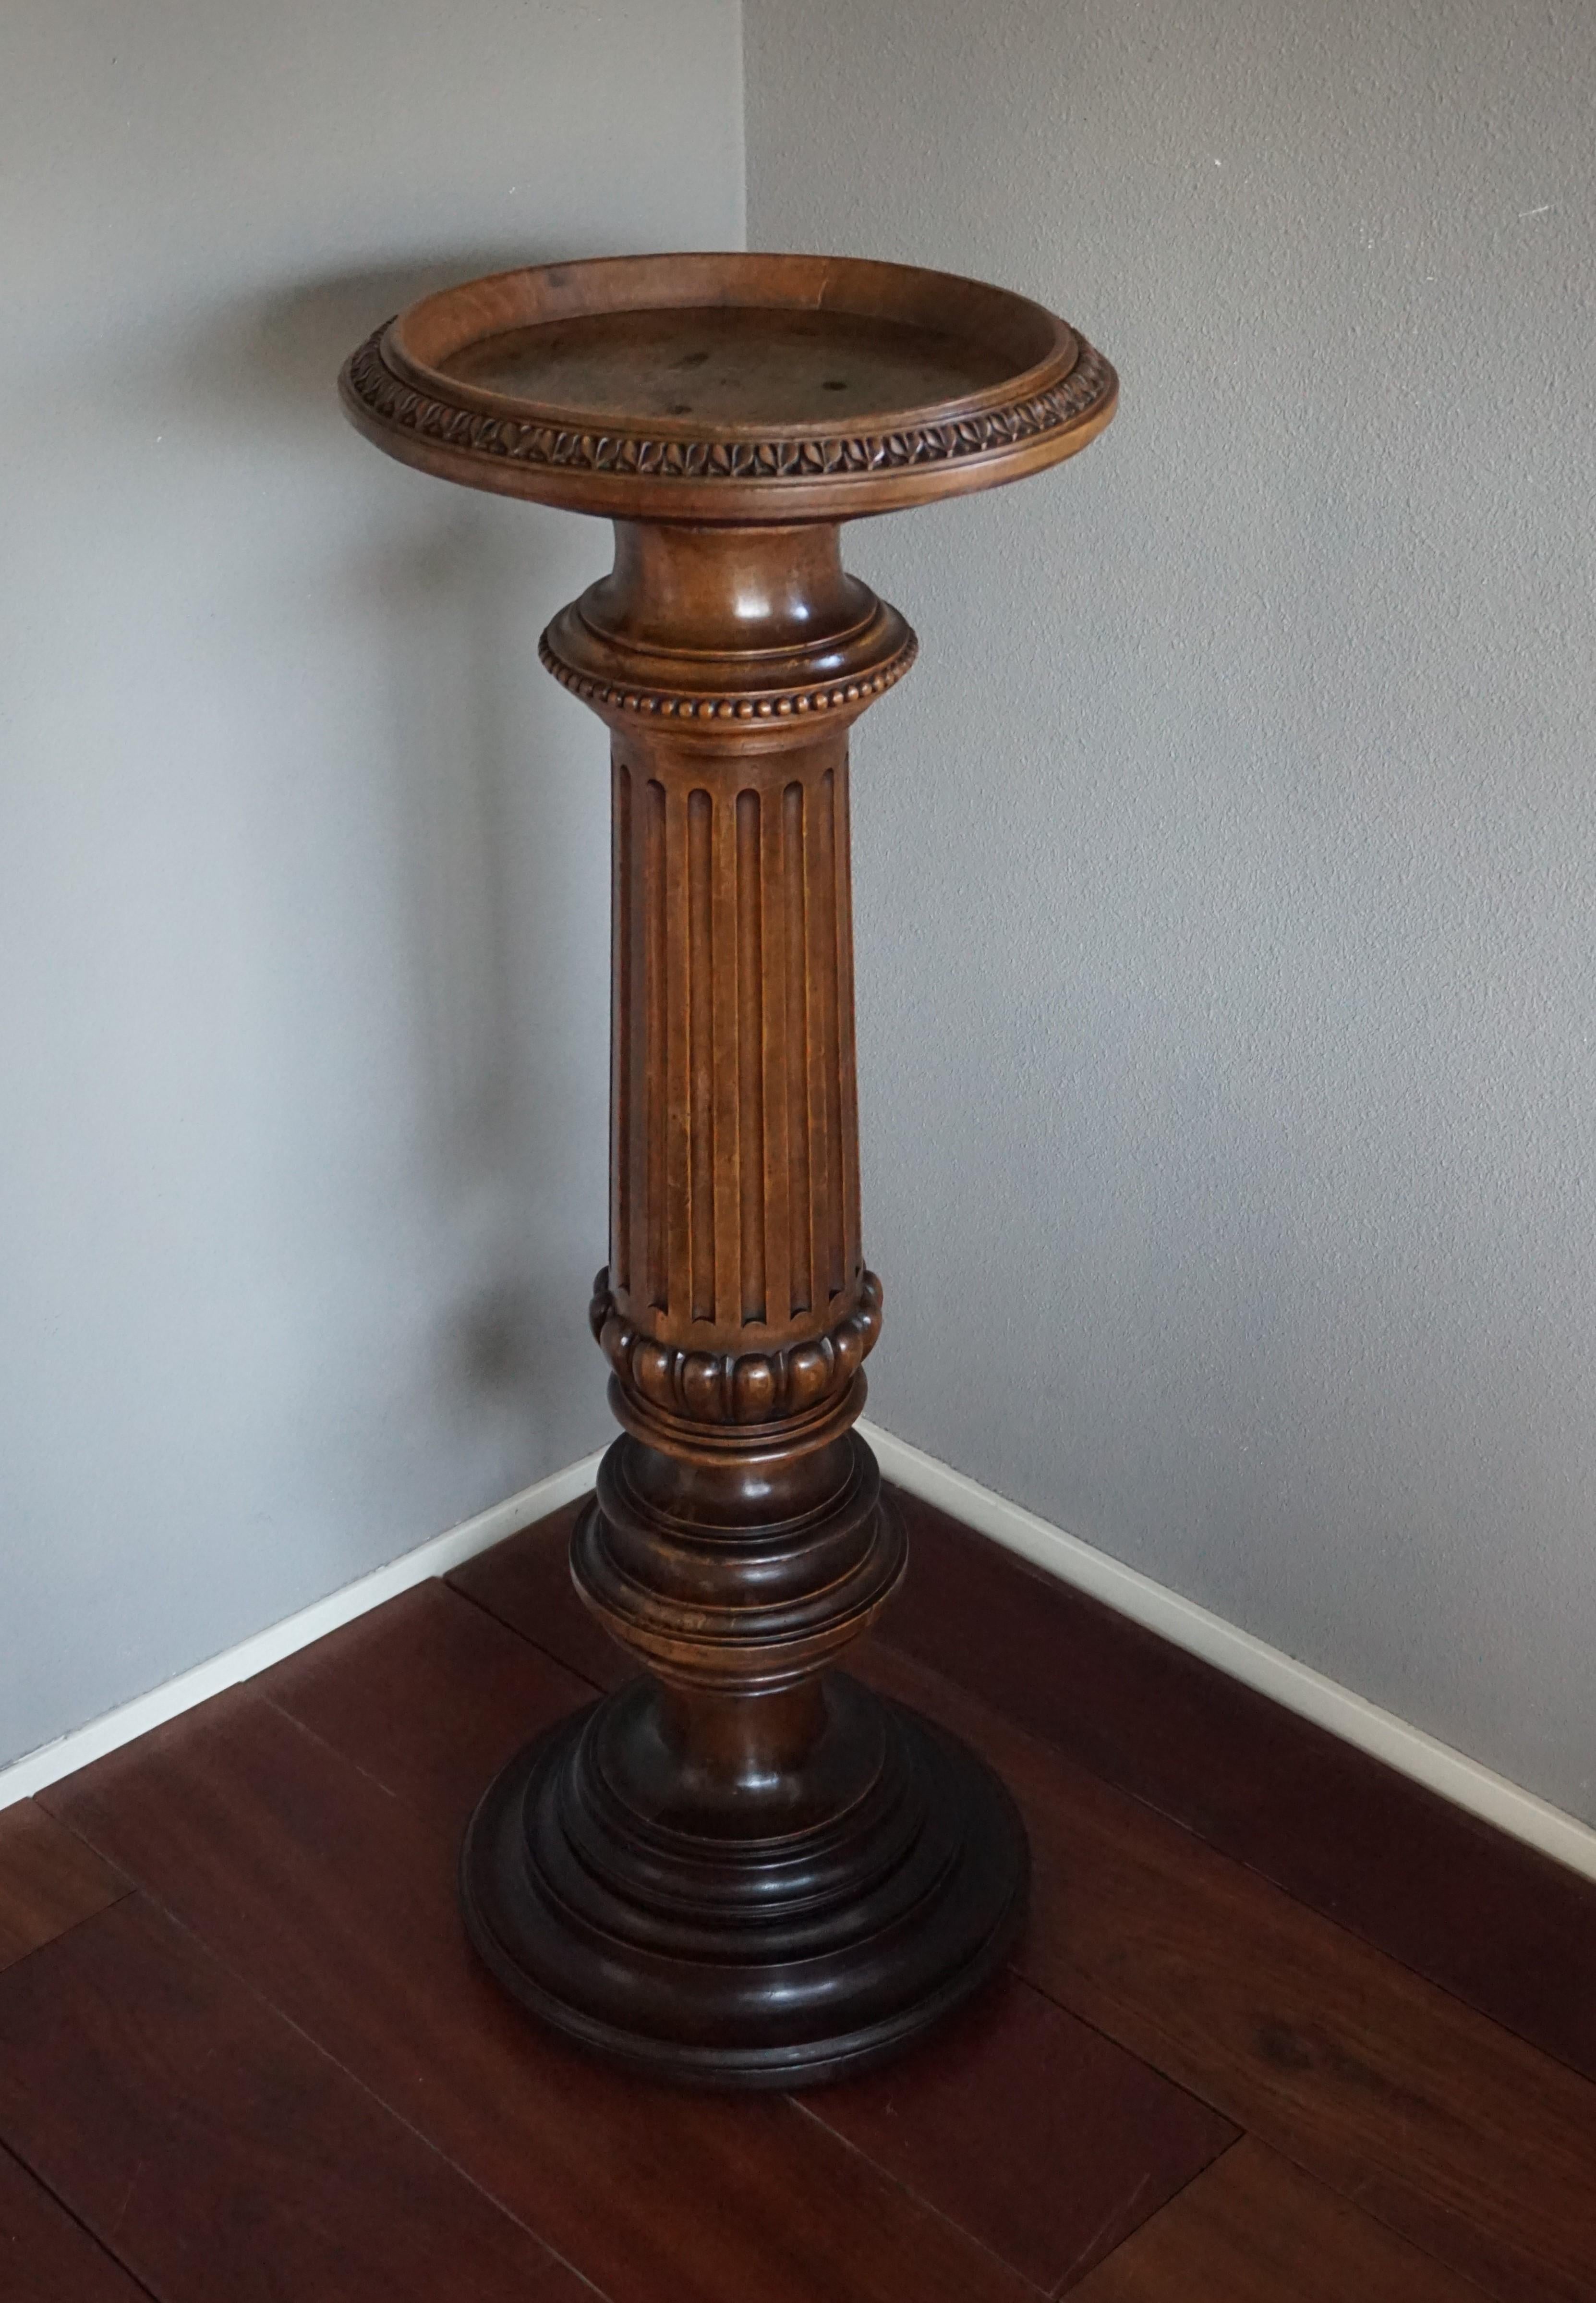 European Antique Late 19th Century Hand Carved Solid Nutwood Round Pedestal Display Stand